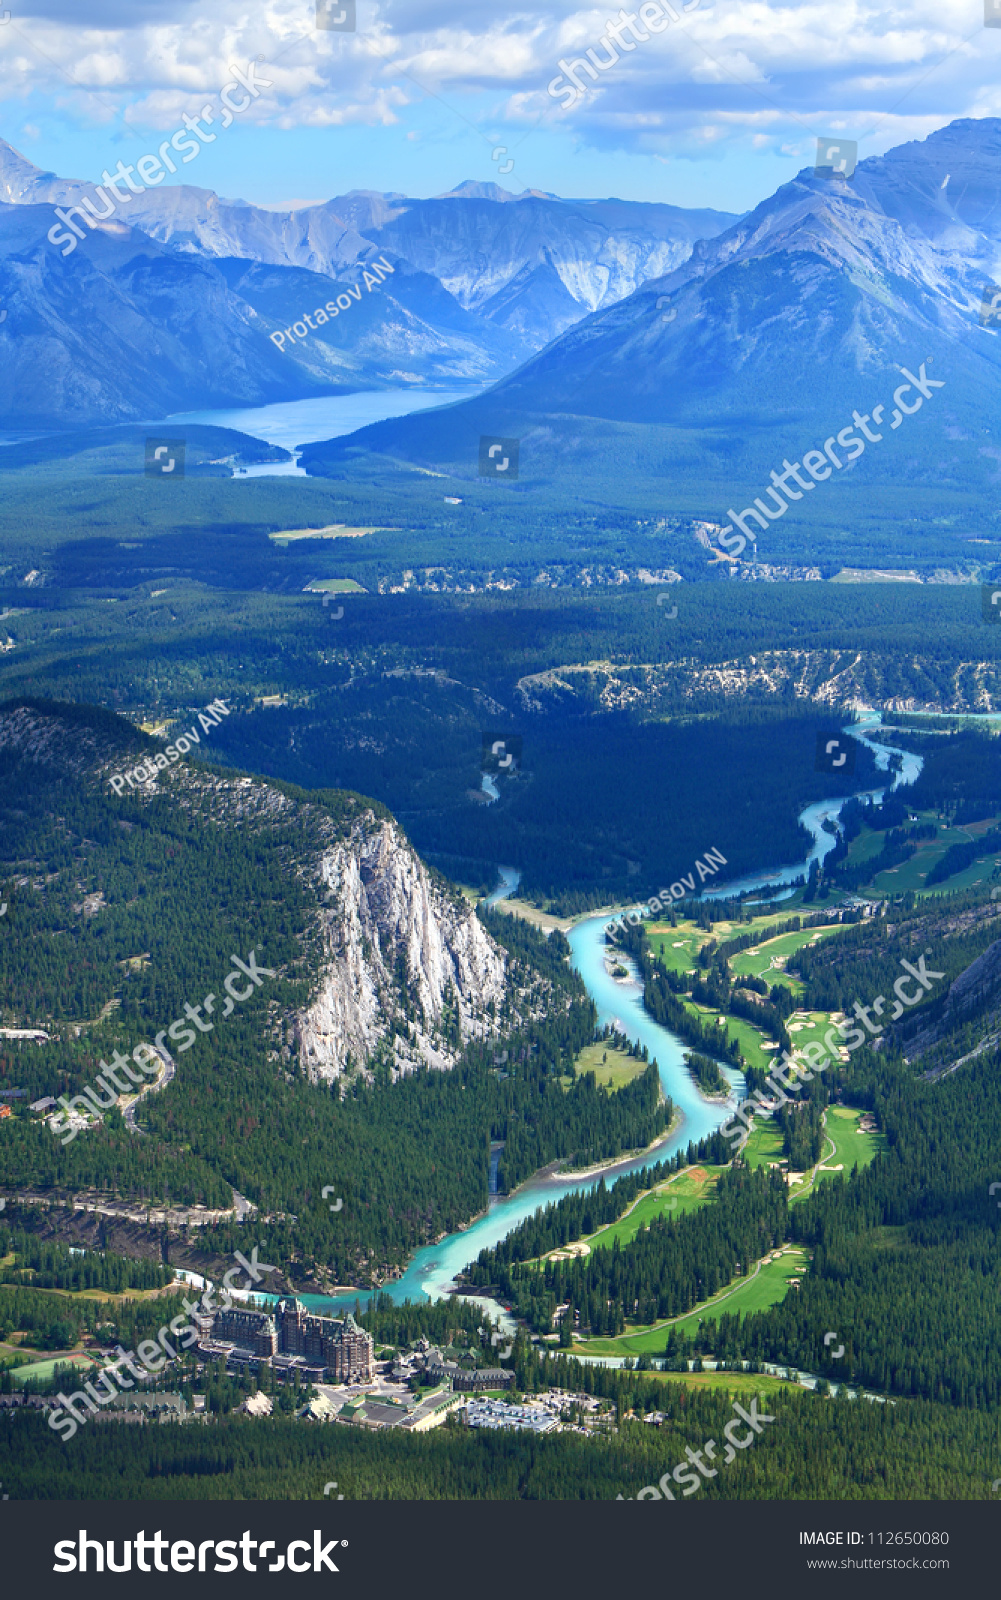 View Of A Bow River Valley And Golf Courses Against Rocky Mountains